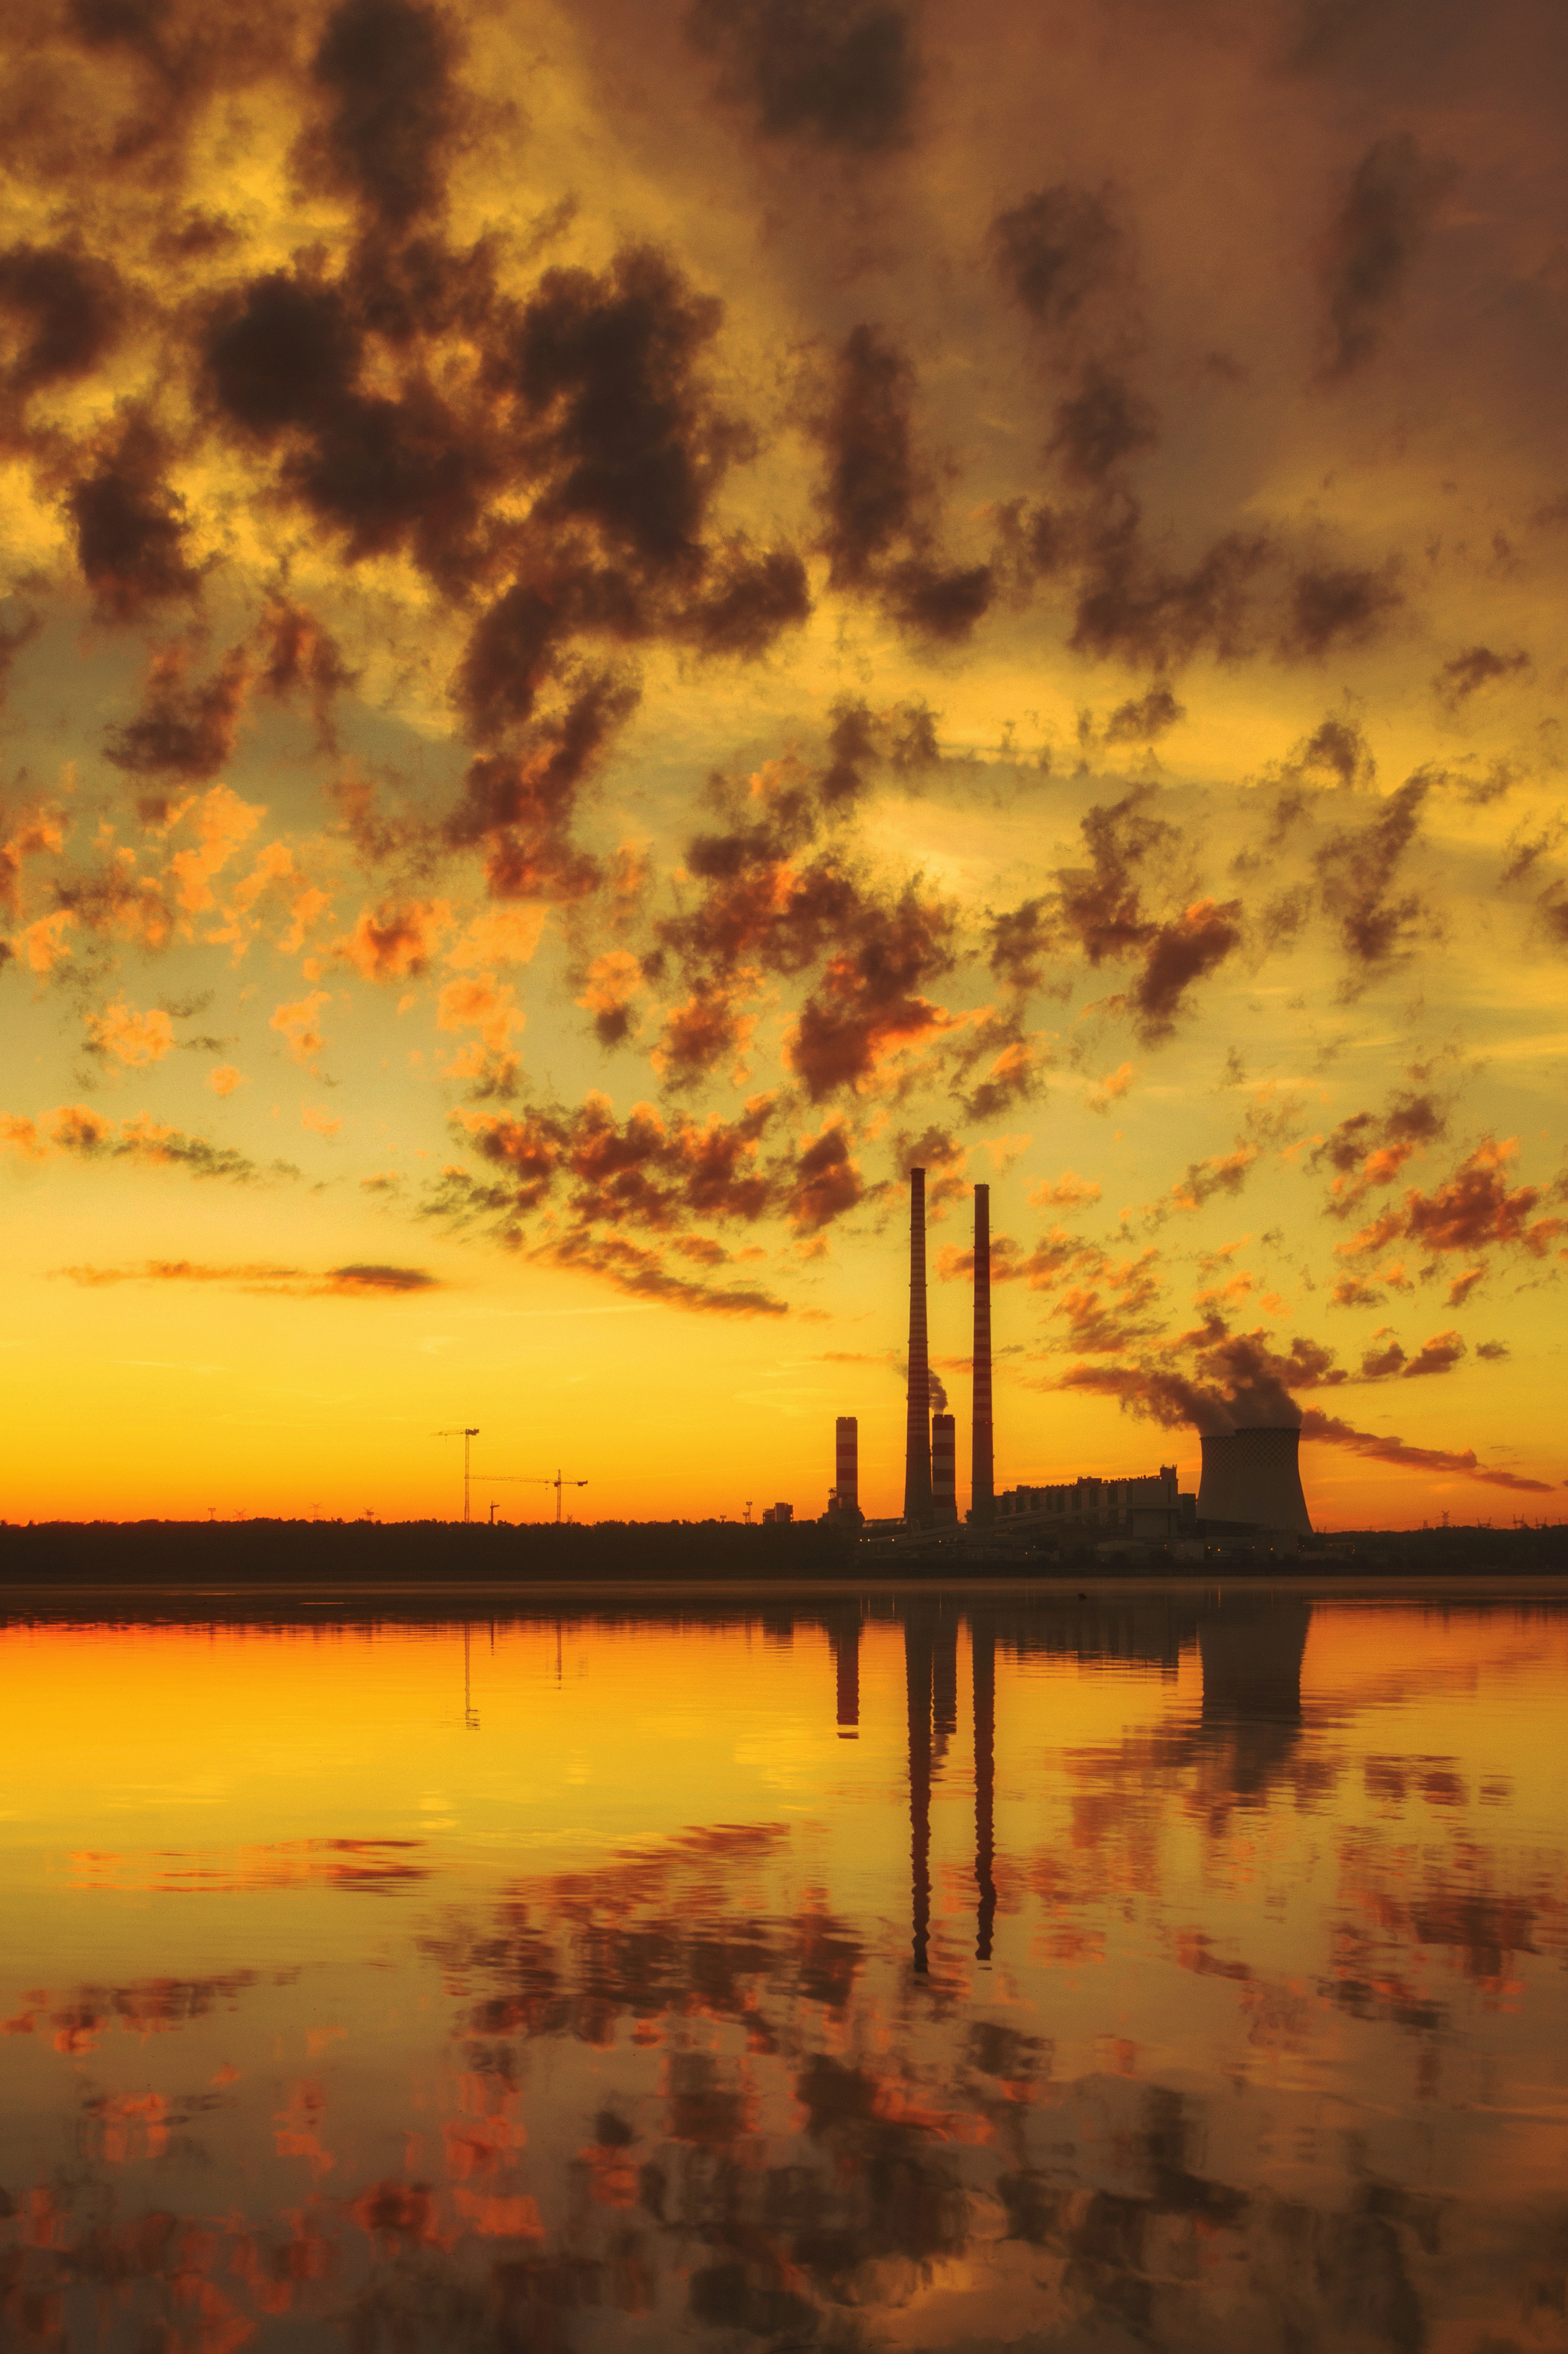 Vertical, Photography, Sunset, Reflection, Sky, Water, Nature, Tranquility, Cloud, Powerstation, Landscape, Industry, Industrial, Lake, Damian Cyfka